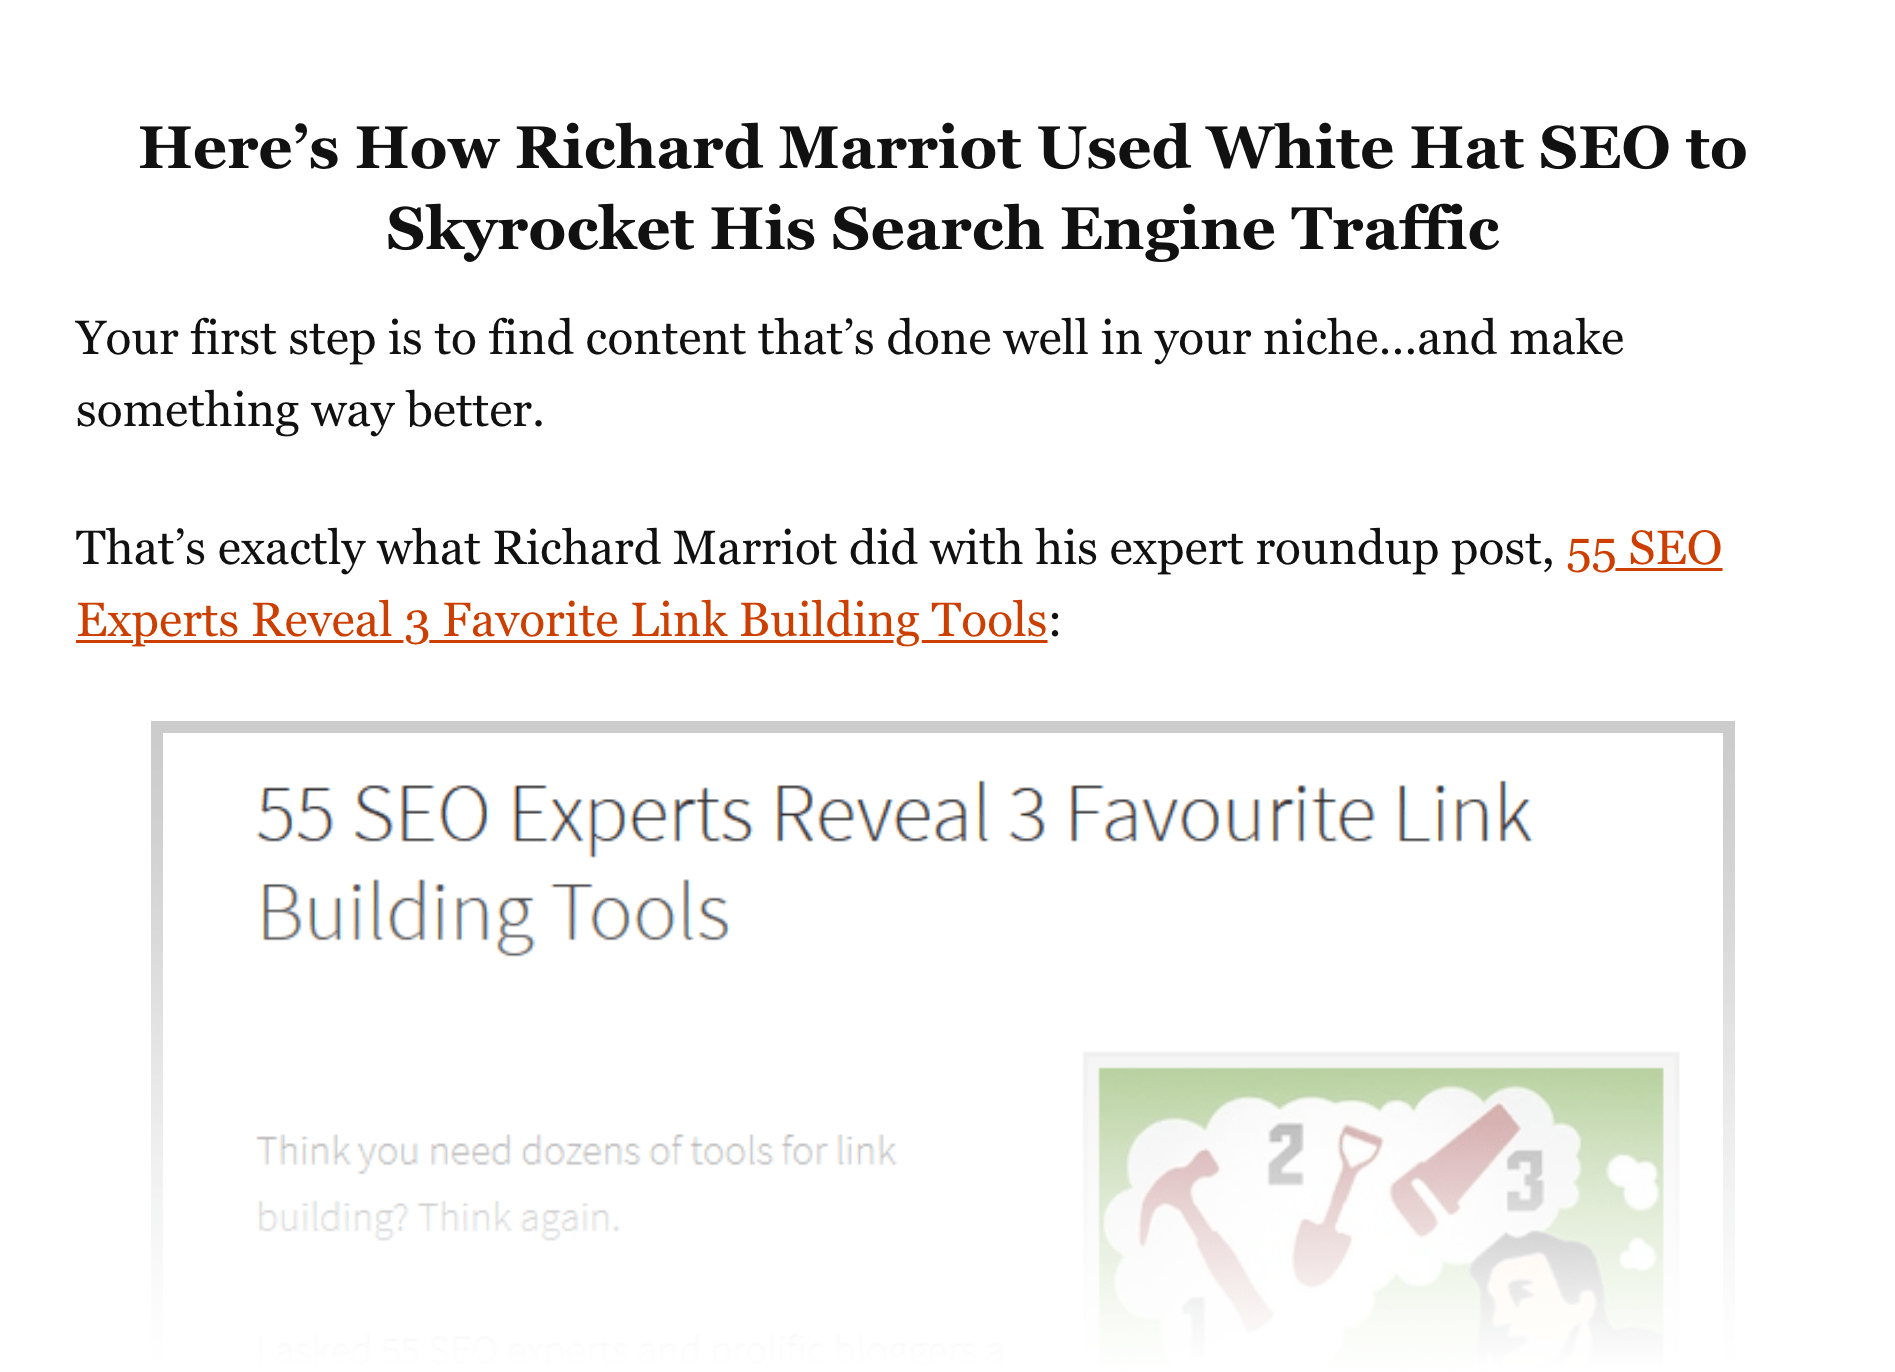 White Hat SEO Featured Story